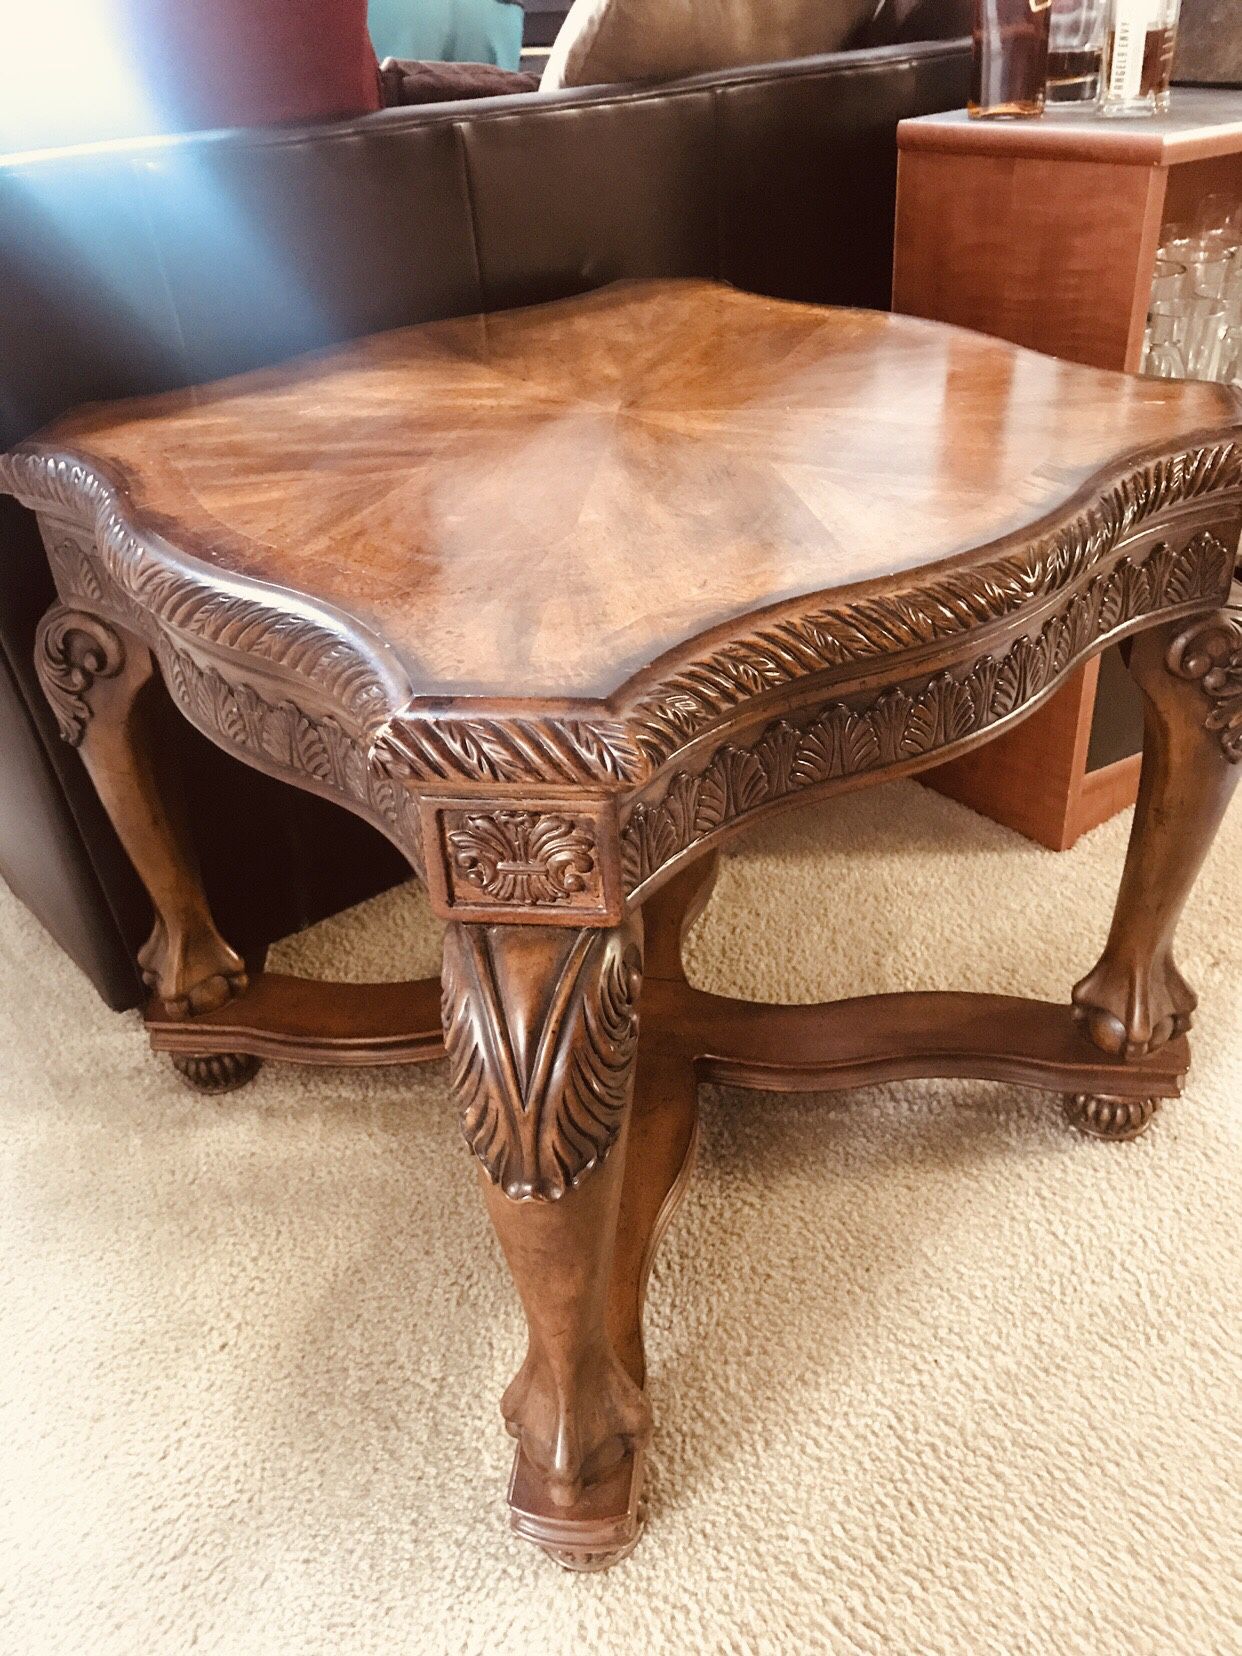 Claw foot solid wood marble top end table and coffee table all together three pieces for $250 ~ Very strong and sturdy!